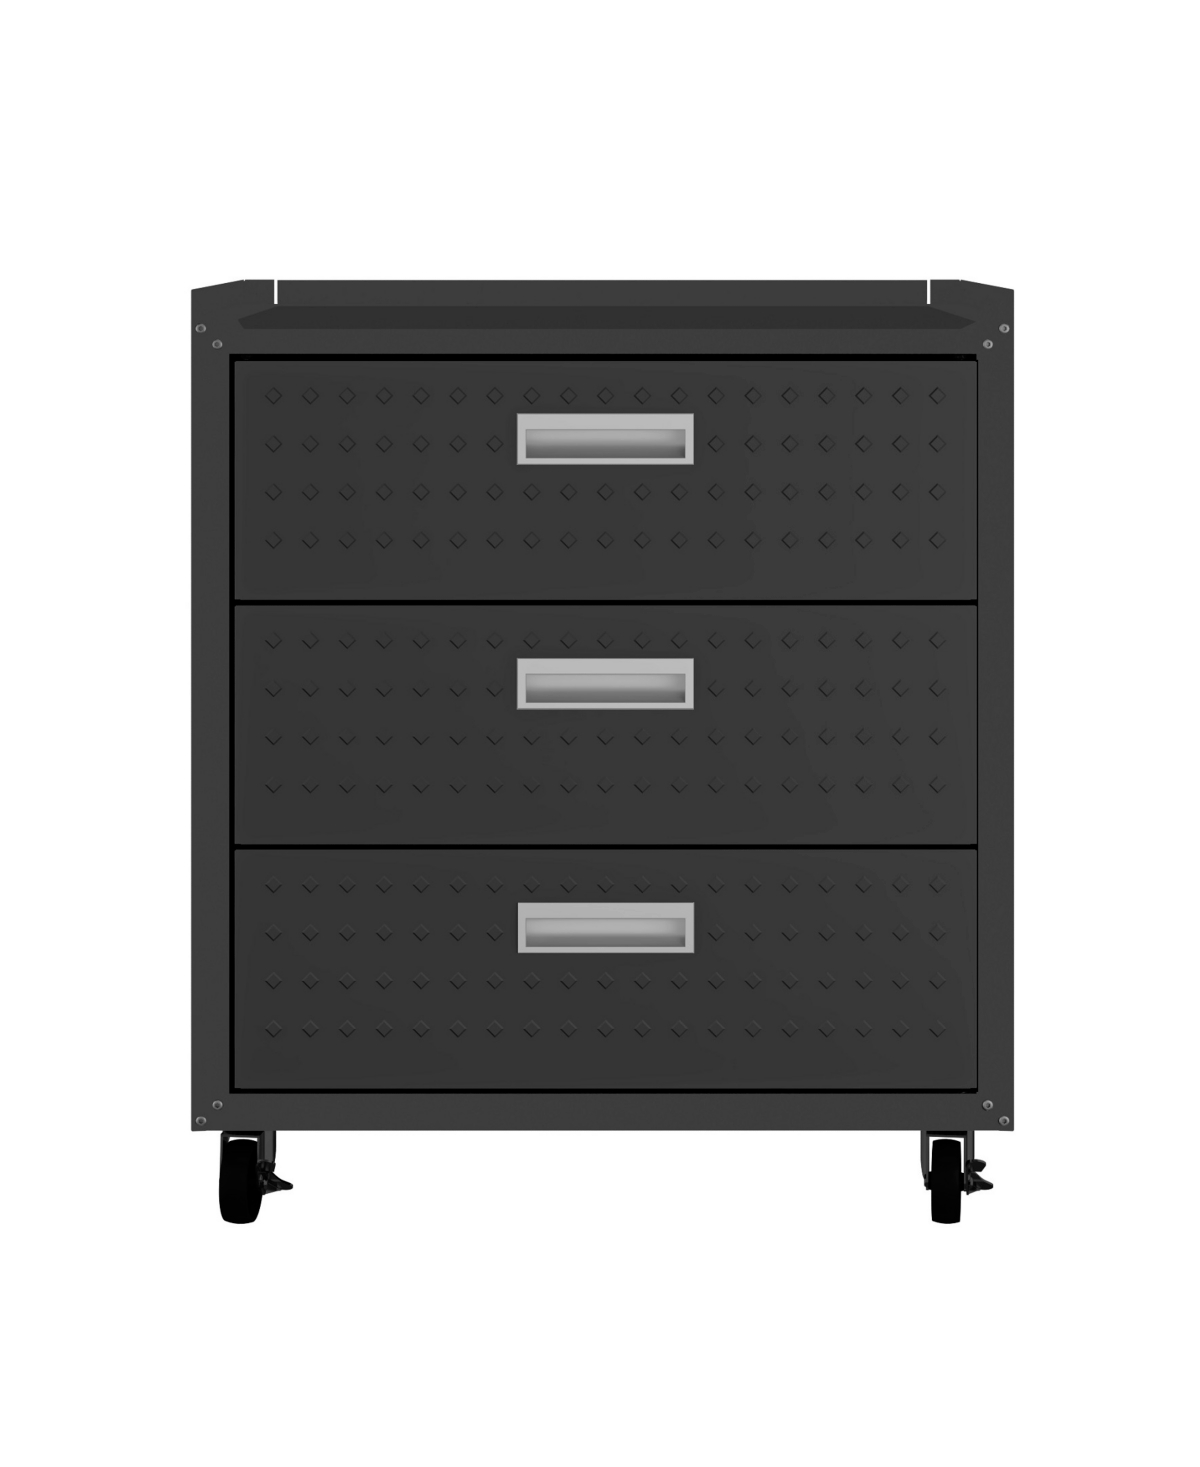 Manhattan Comfort Fortress 32.1" Steel Mobile Garage Chest With Drawers In Charcoal Gray